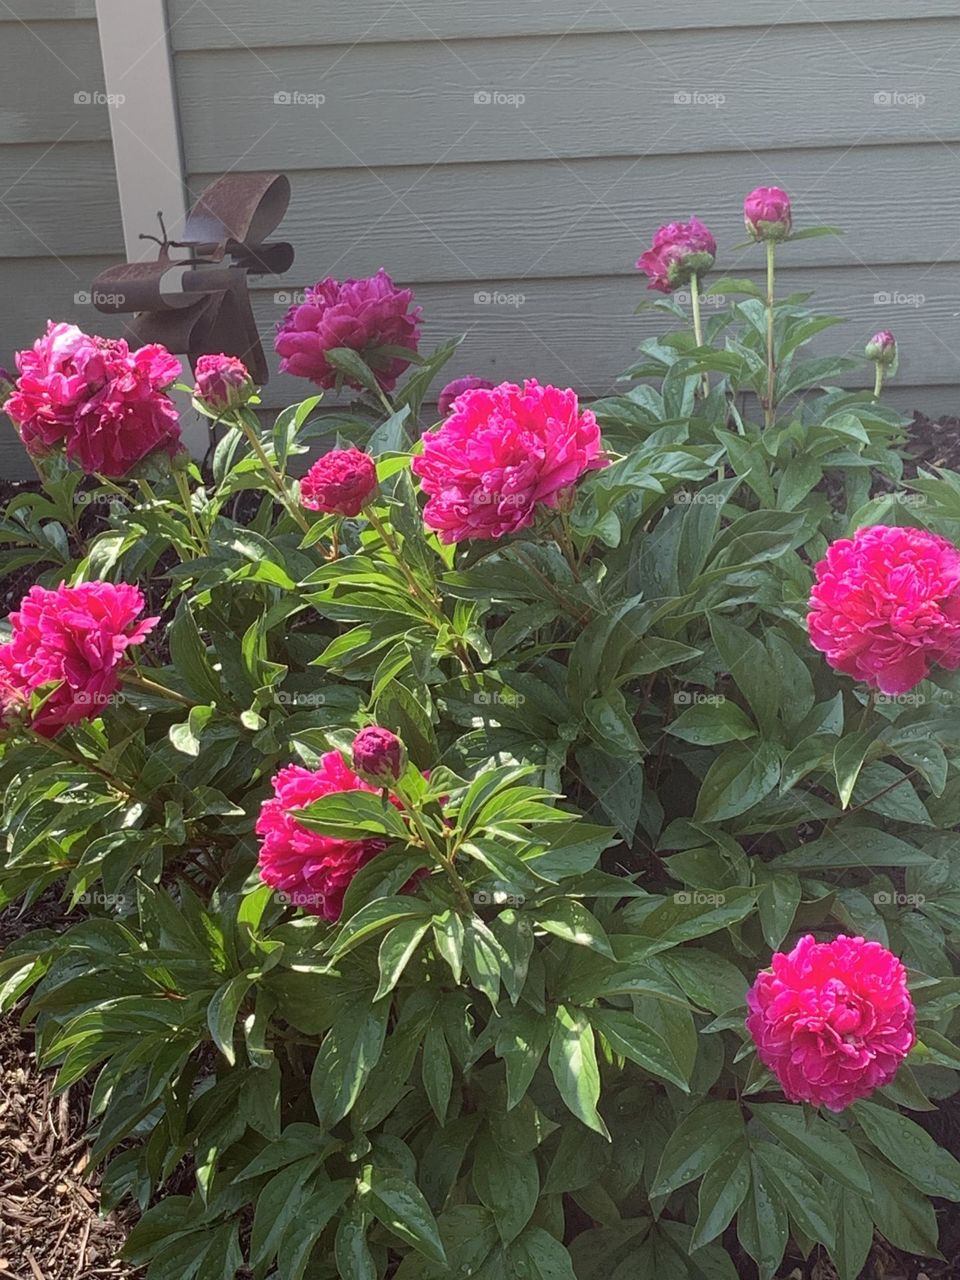 Out of control peonies 